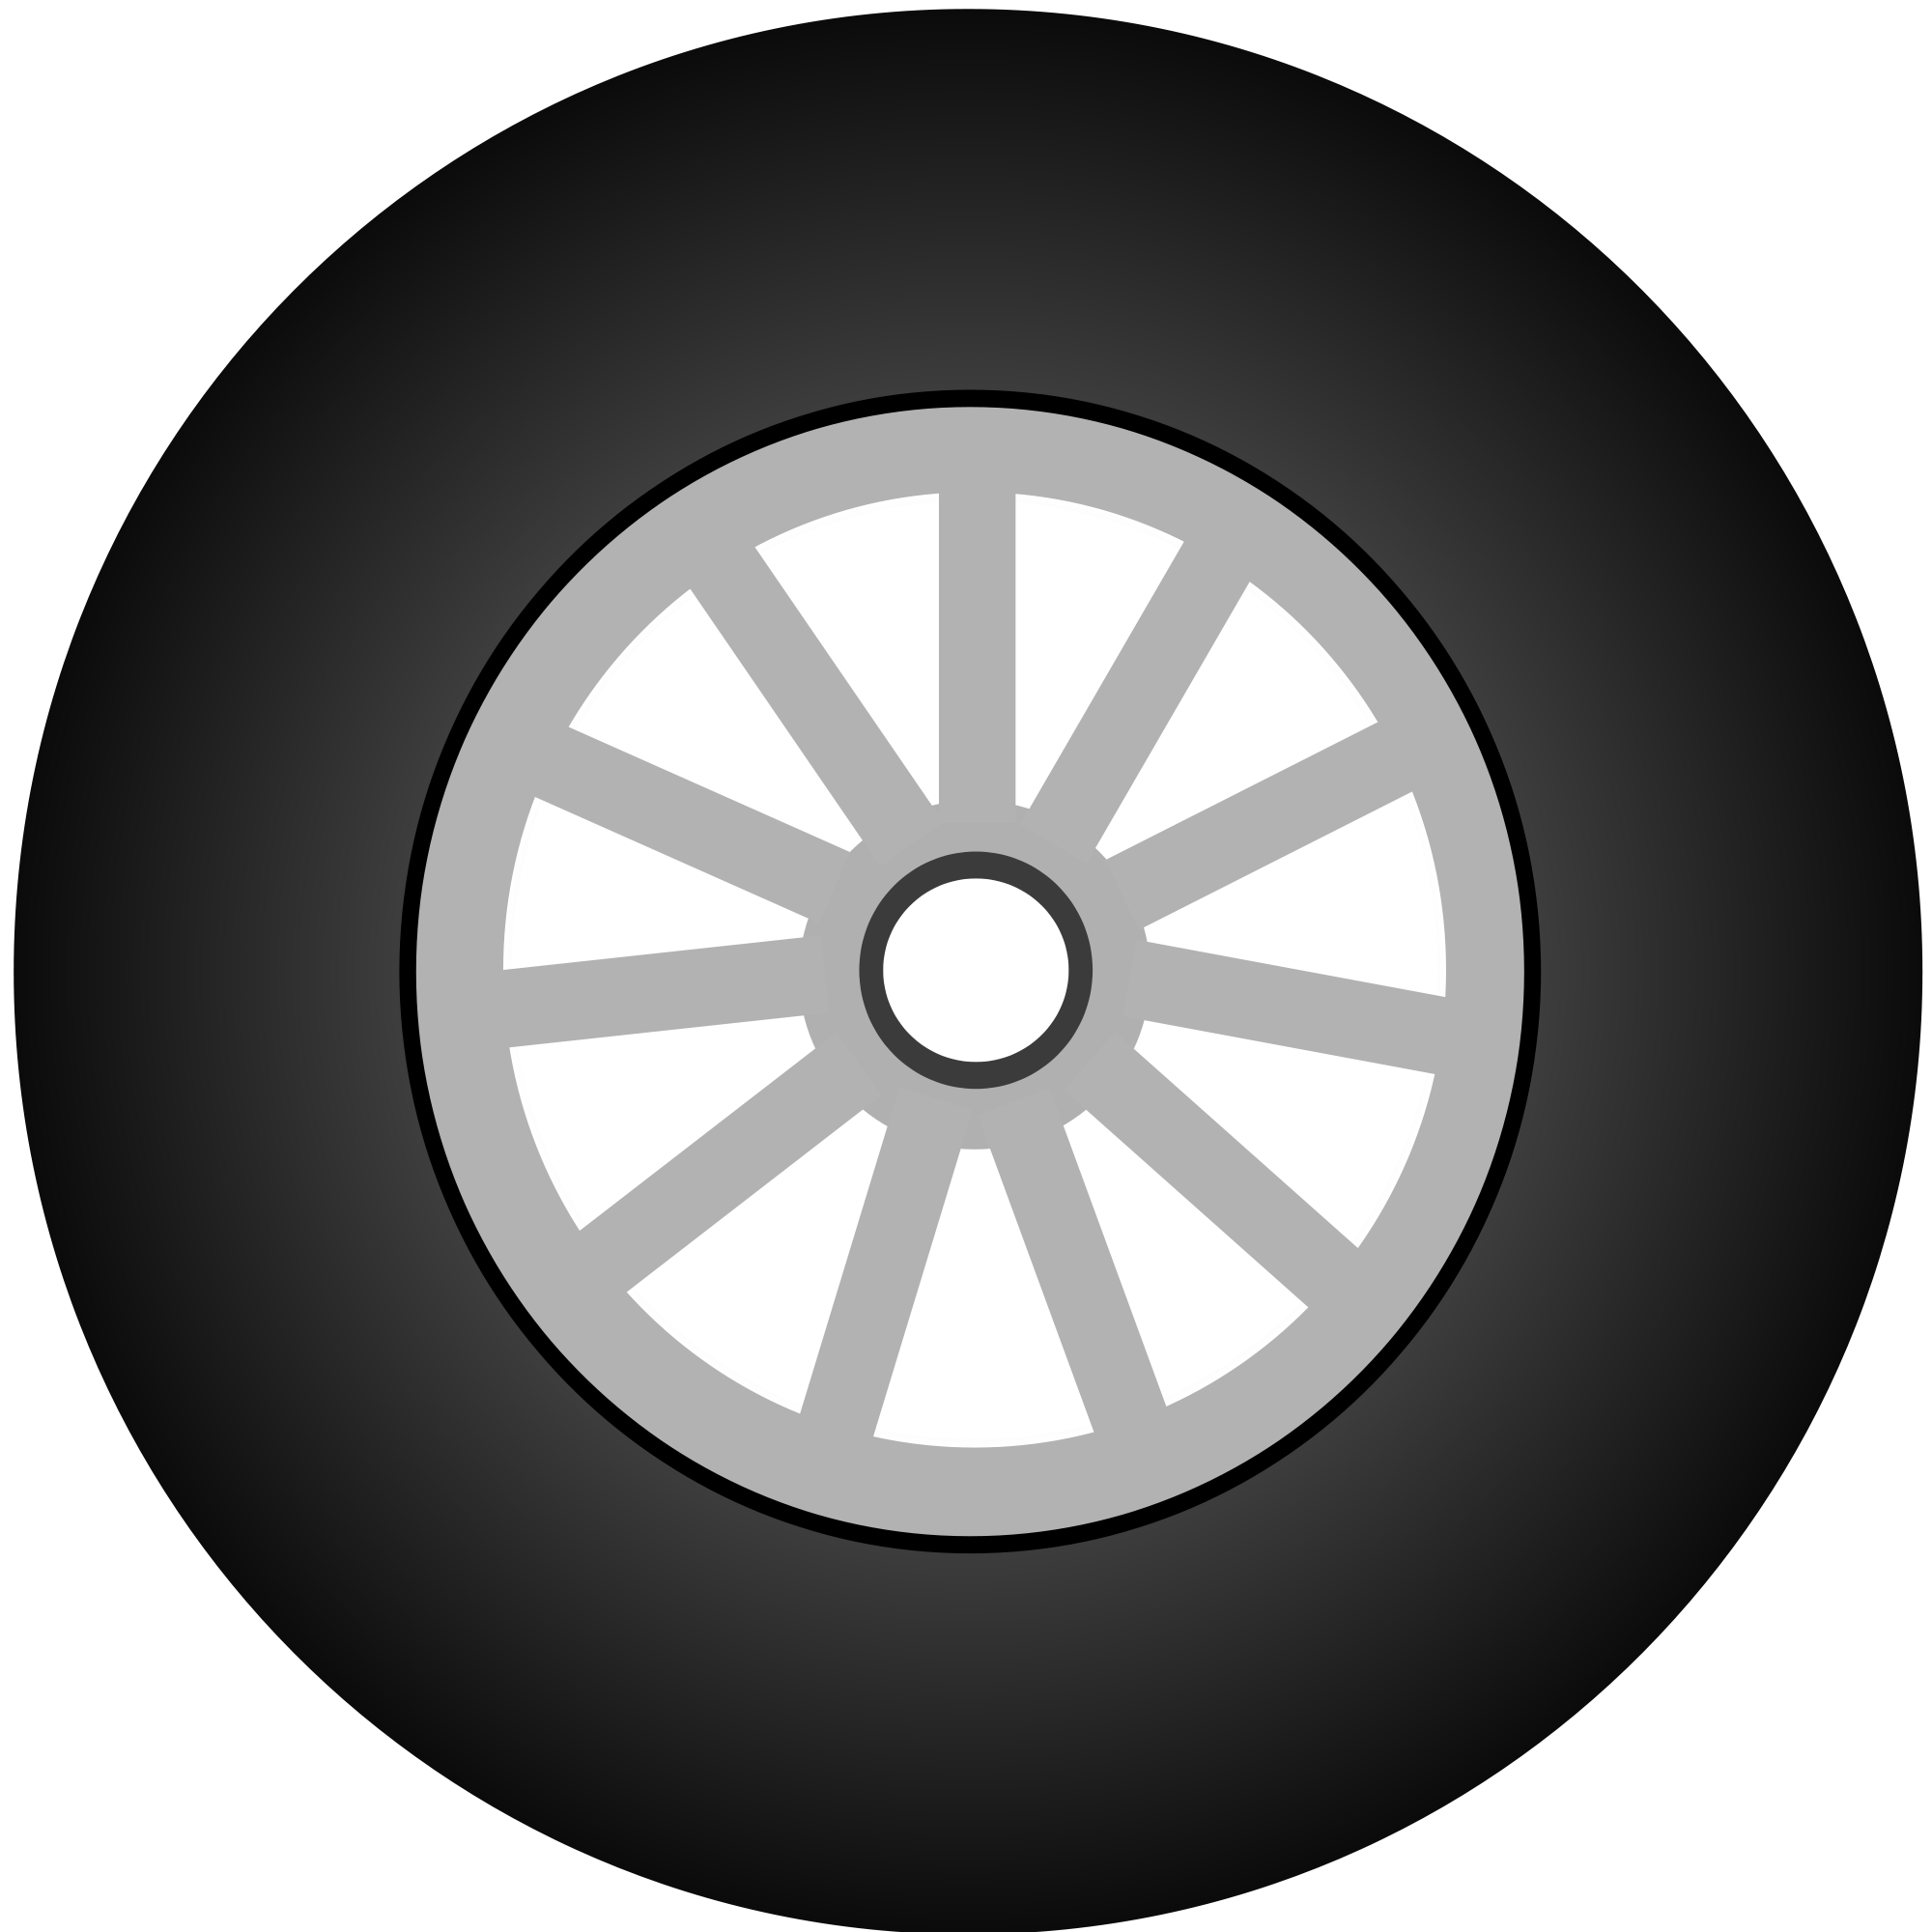 File:Racing tyre icon.svg